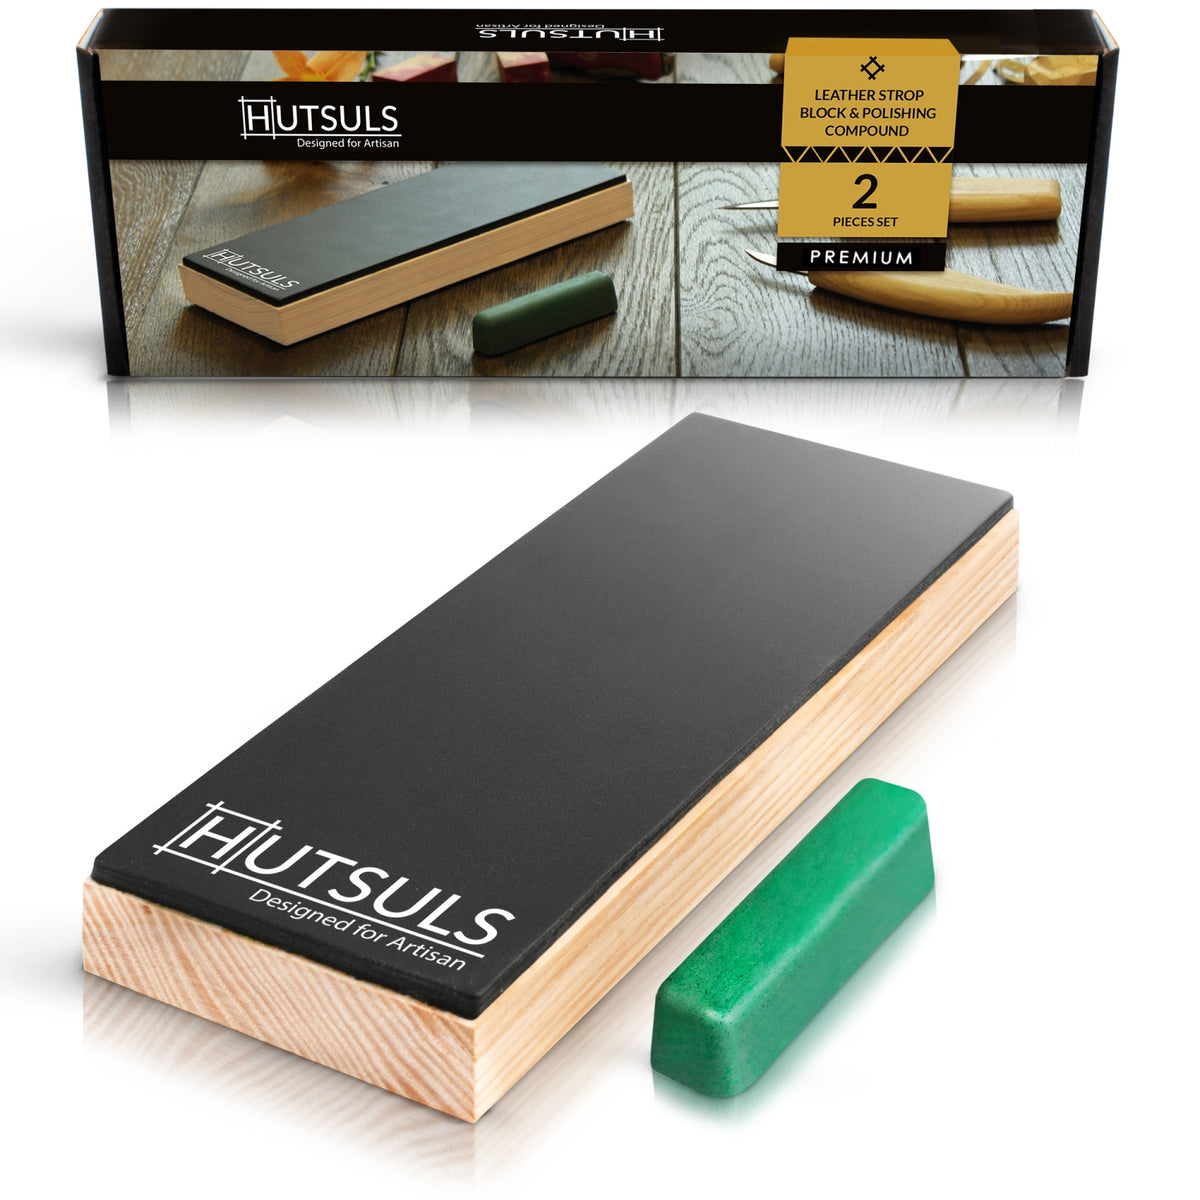 Hutsuls Brown Leather Strop with Compound - Stropping Kit, Green